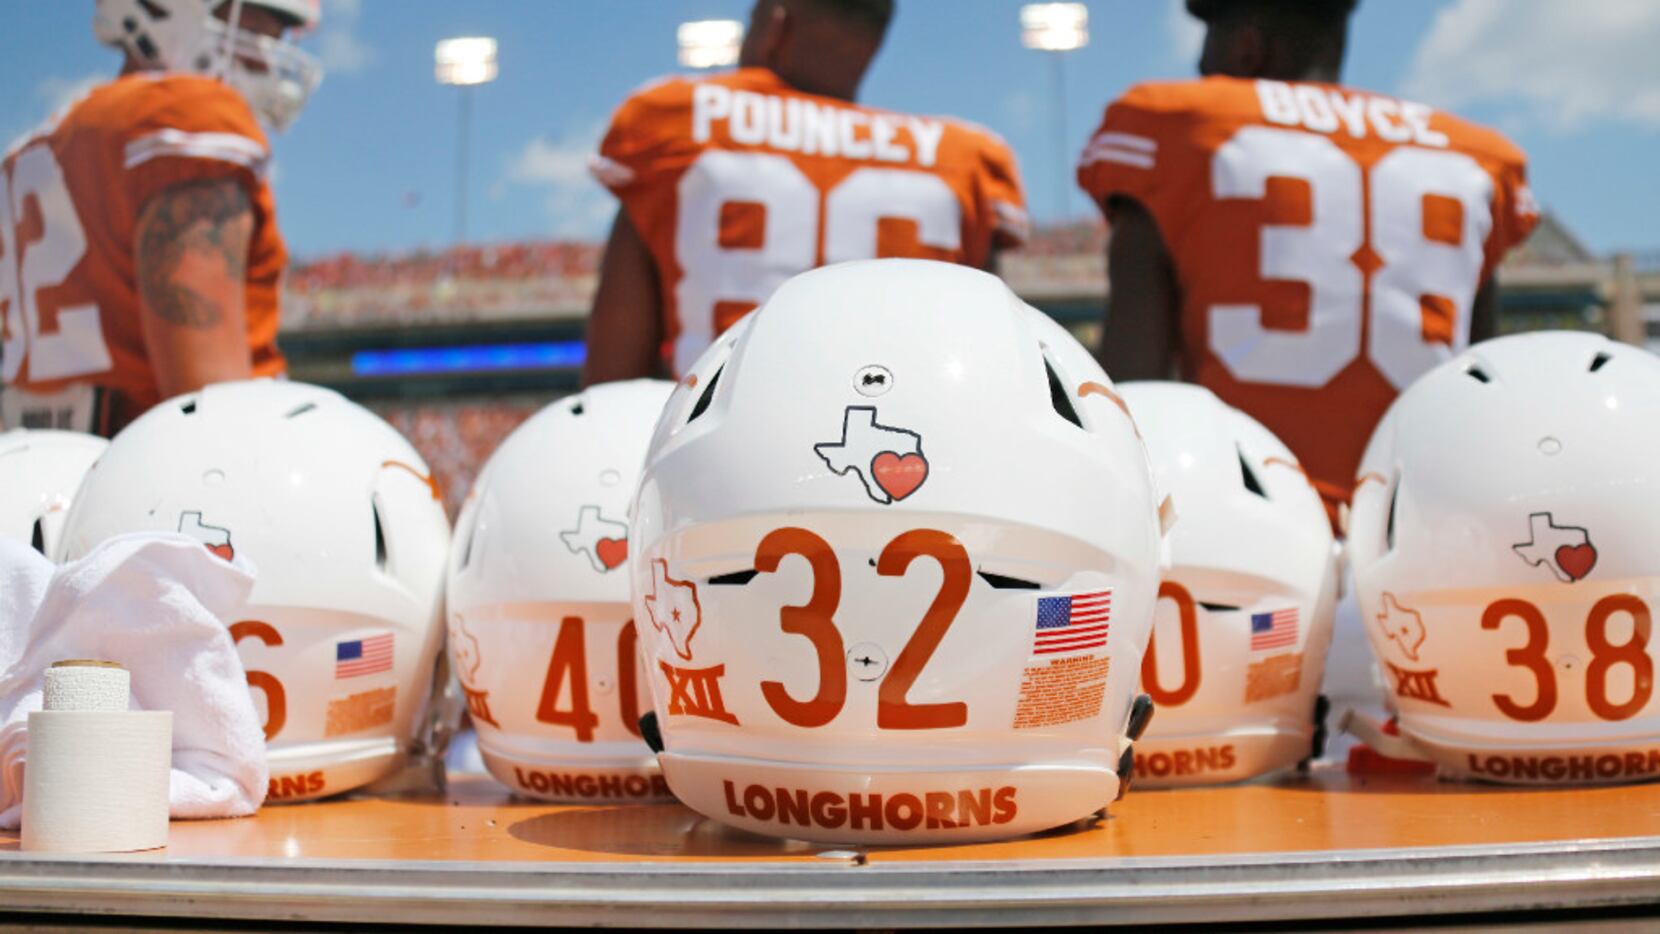 Every Texas Longhorns helmet sports a special decal showing support for the Houston area...